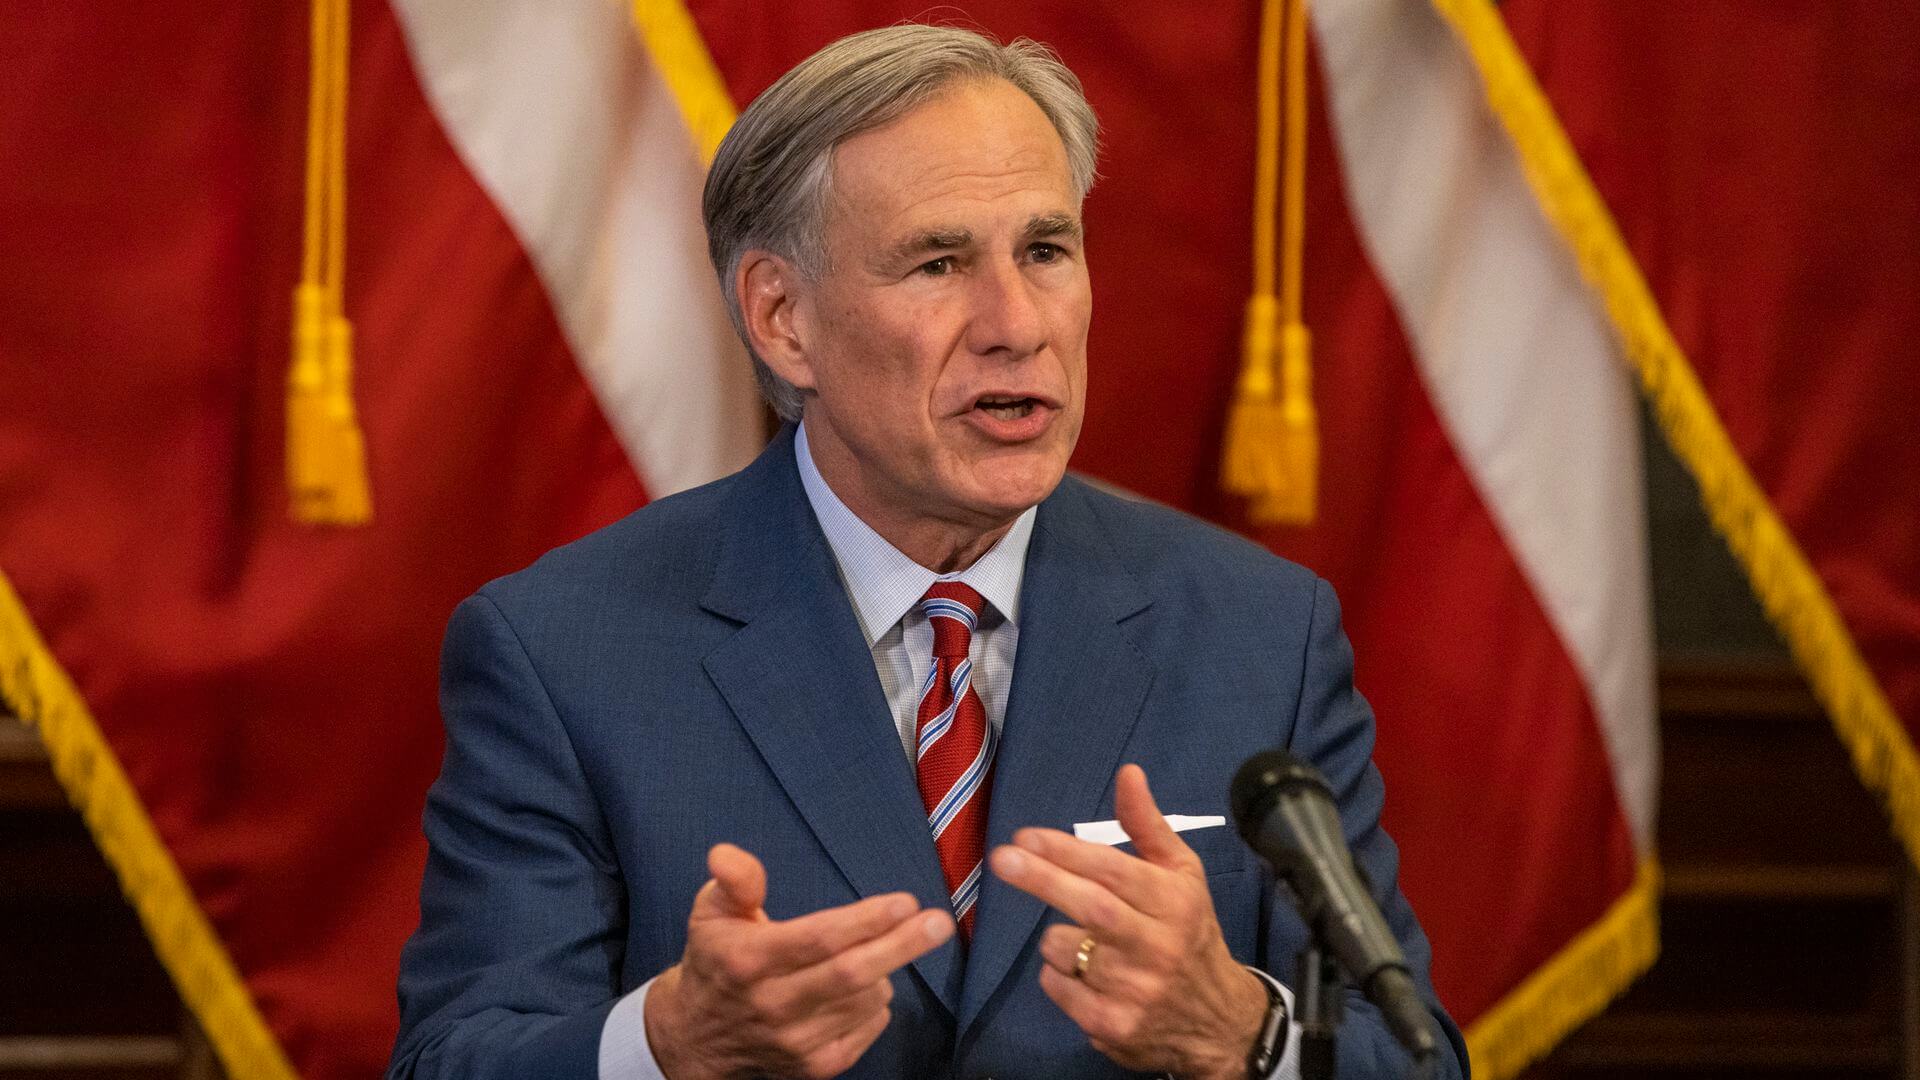 Texas Bans All Government Entities & Businesses From Requiring Proof of Vaccination